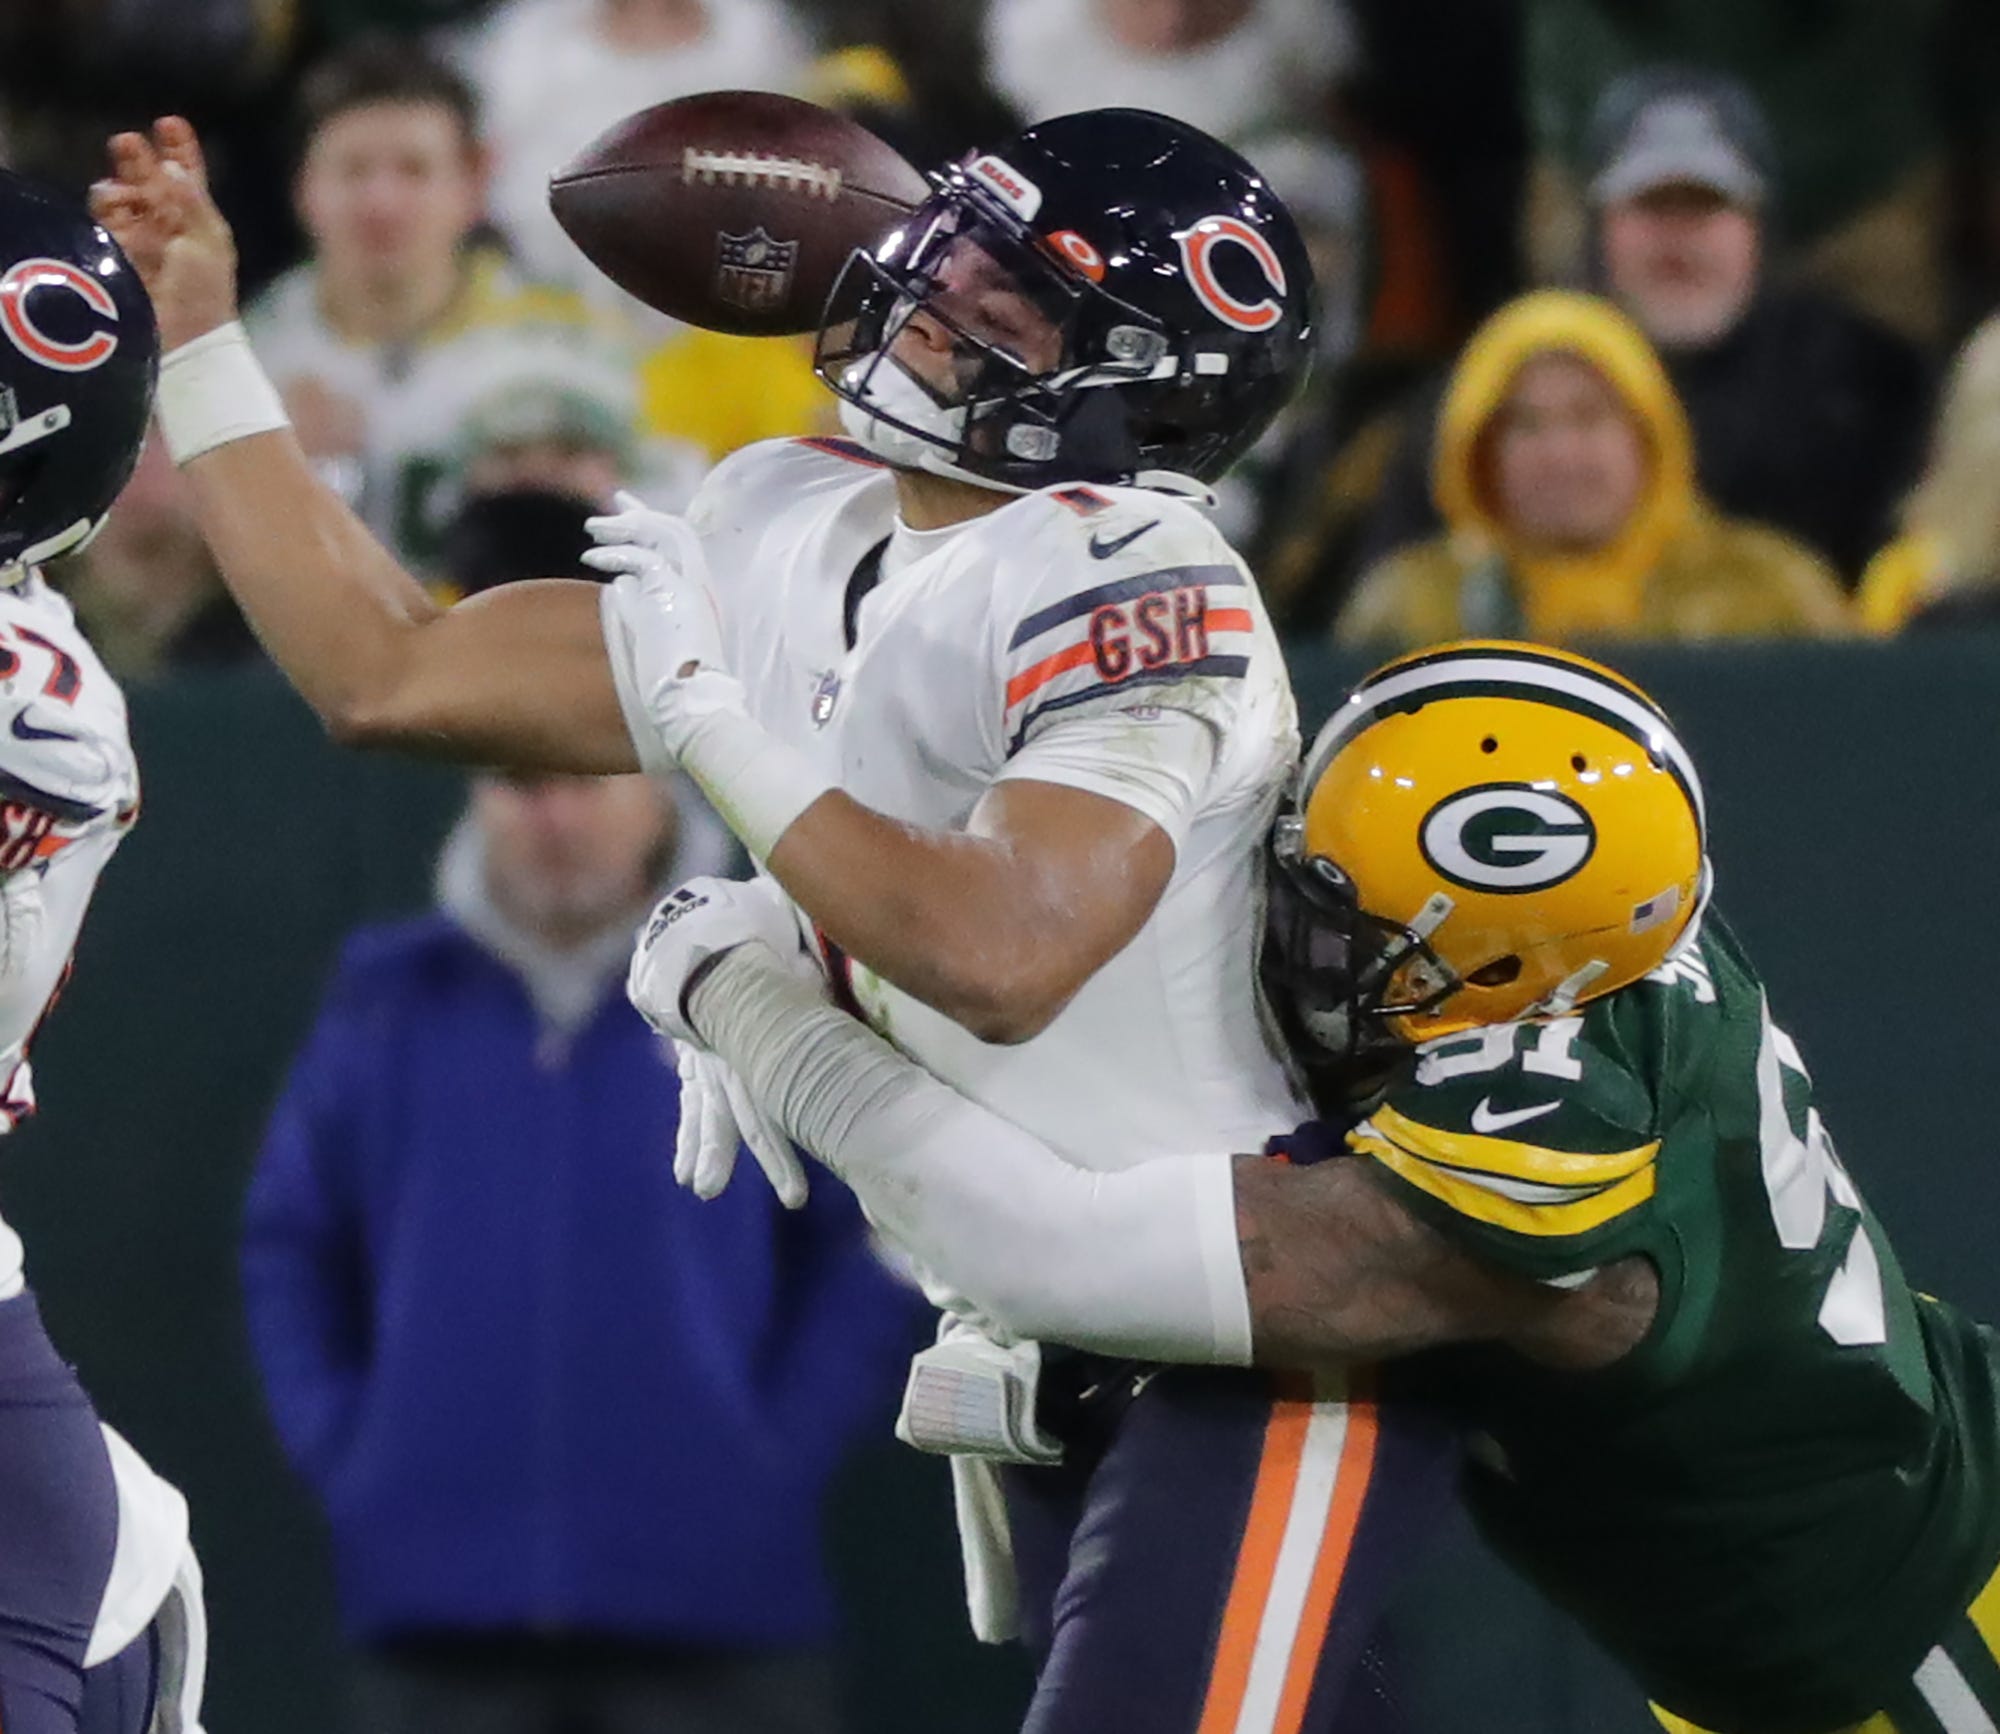 Green Bay Packers linebacker Preston Smith (91) forces a fumble by Chicago Bears quarterback Justin Fields (1) during the third quarter of their game Sunday, December 12, 2021 at Lambeau Field in Green Bay, Wis.